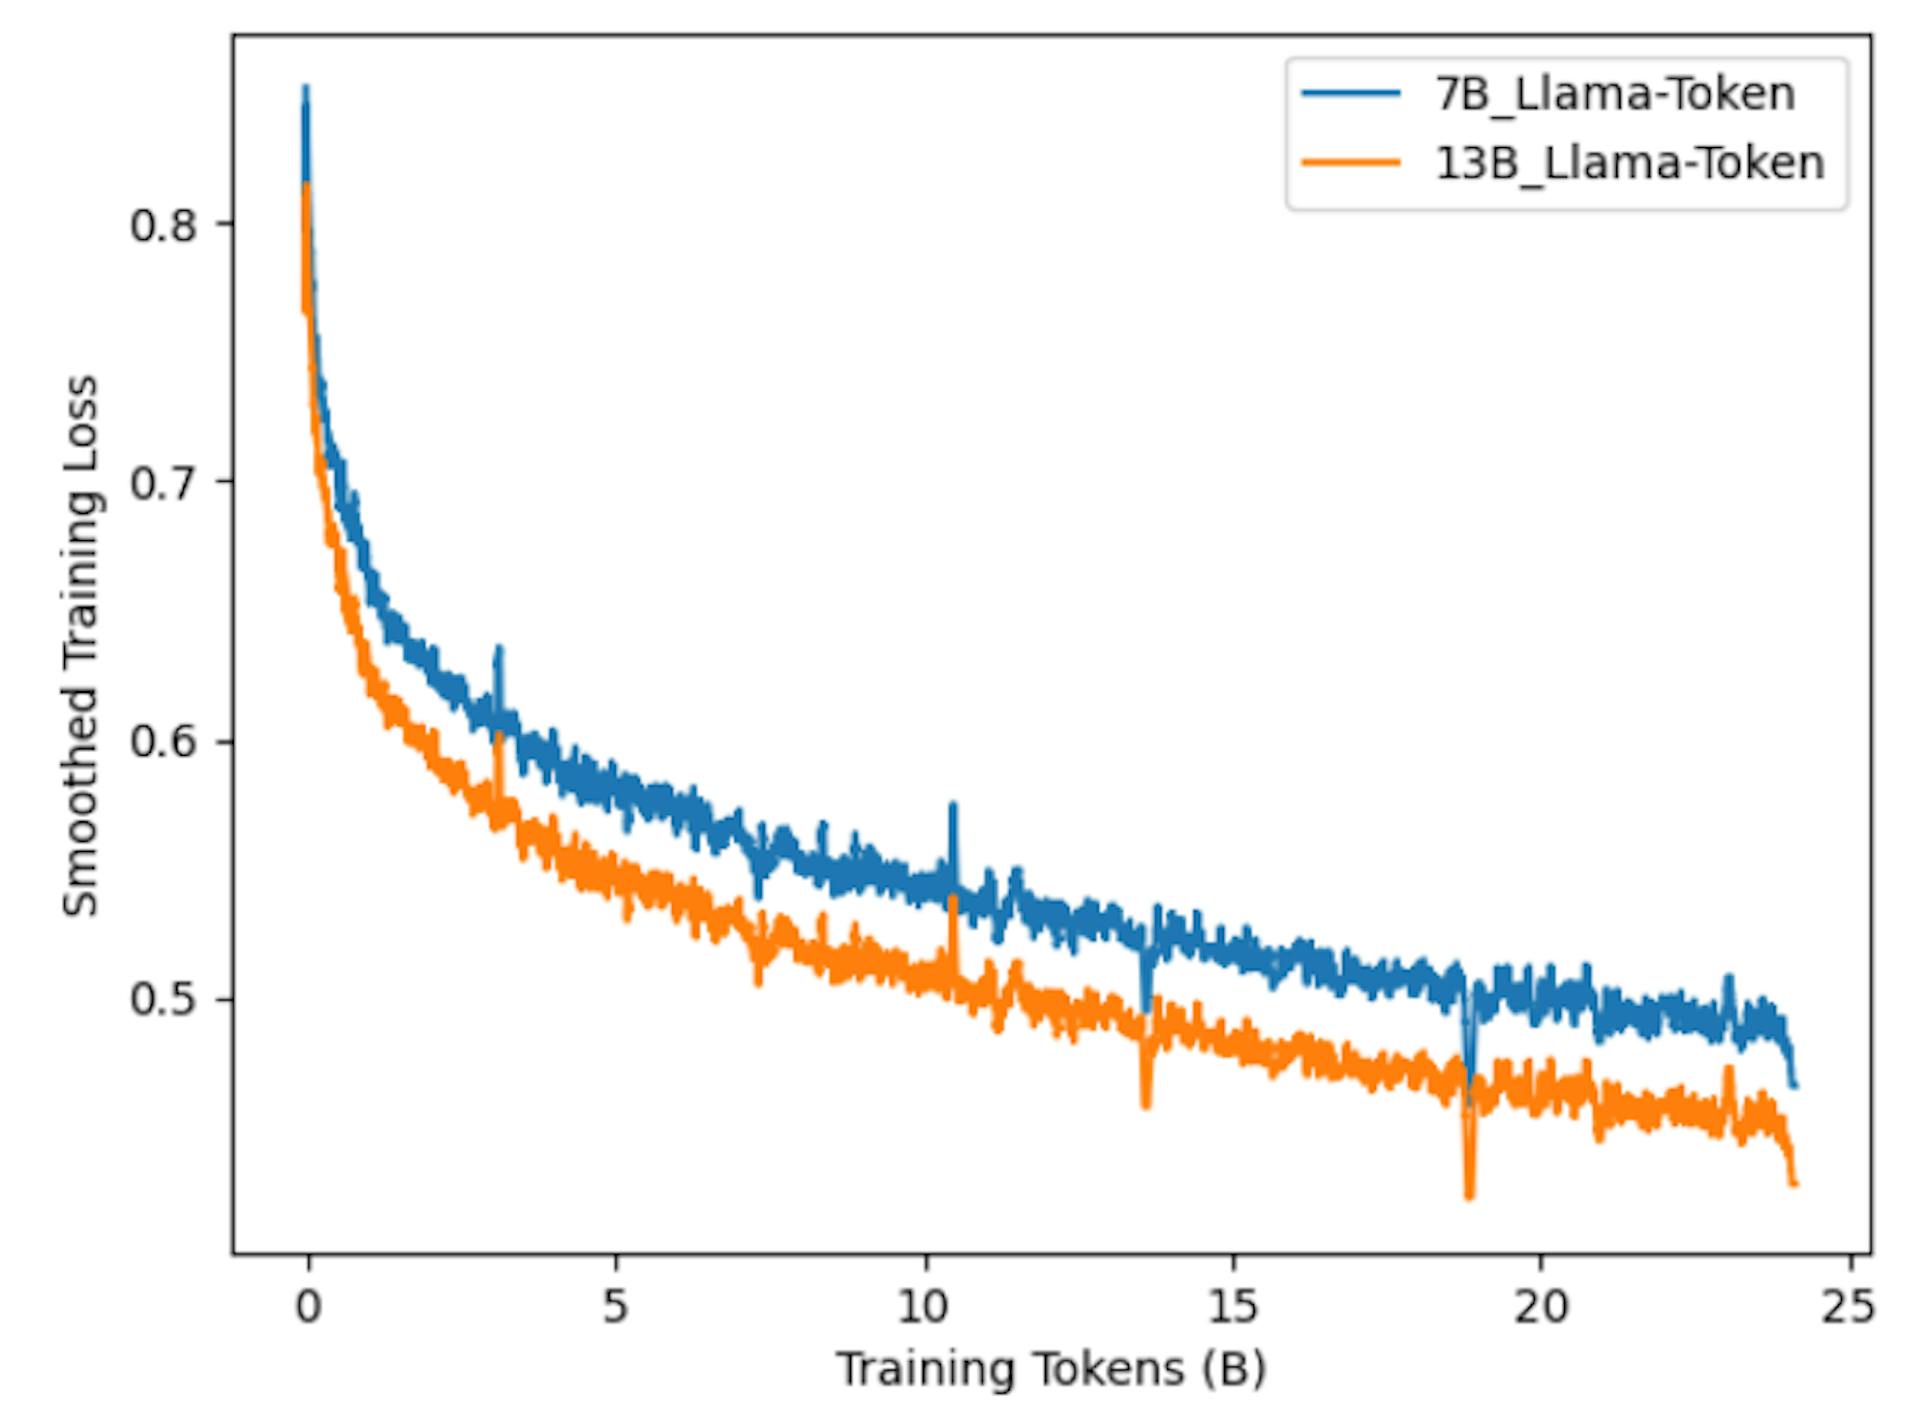 Fig. 11: Smoothed Training Loss with Original LLaMA2 Tokenizer.